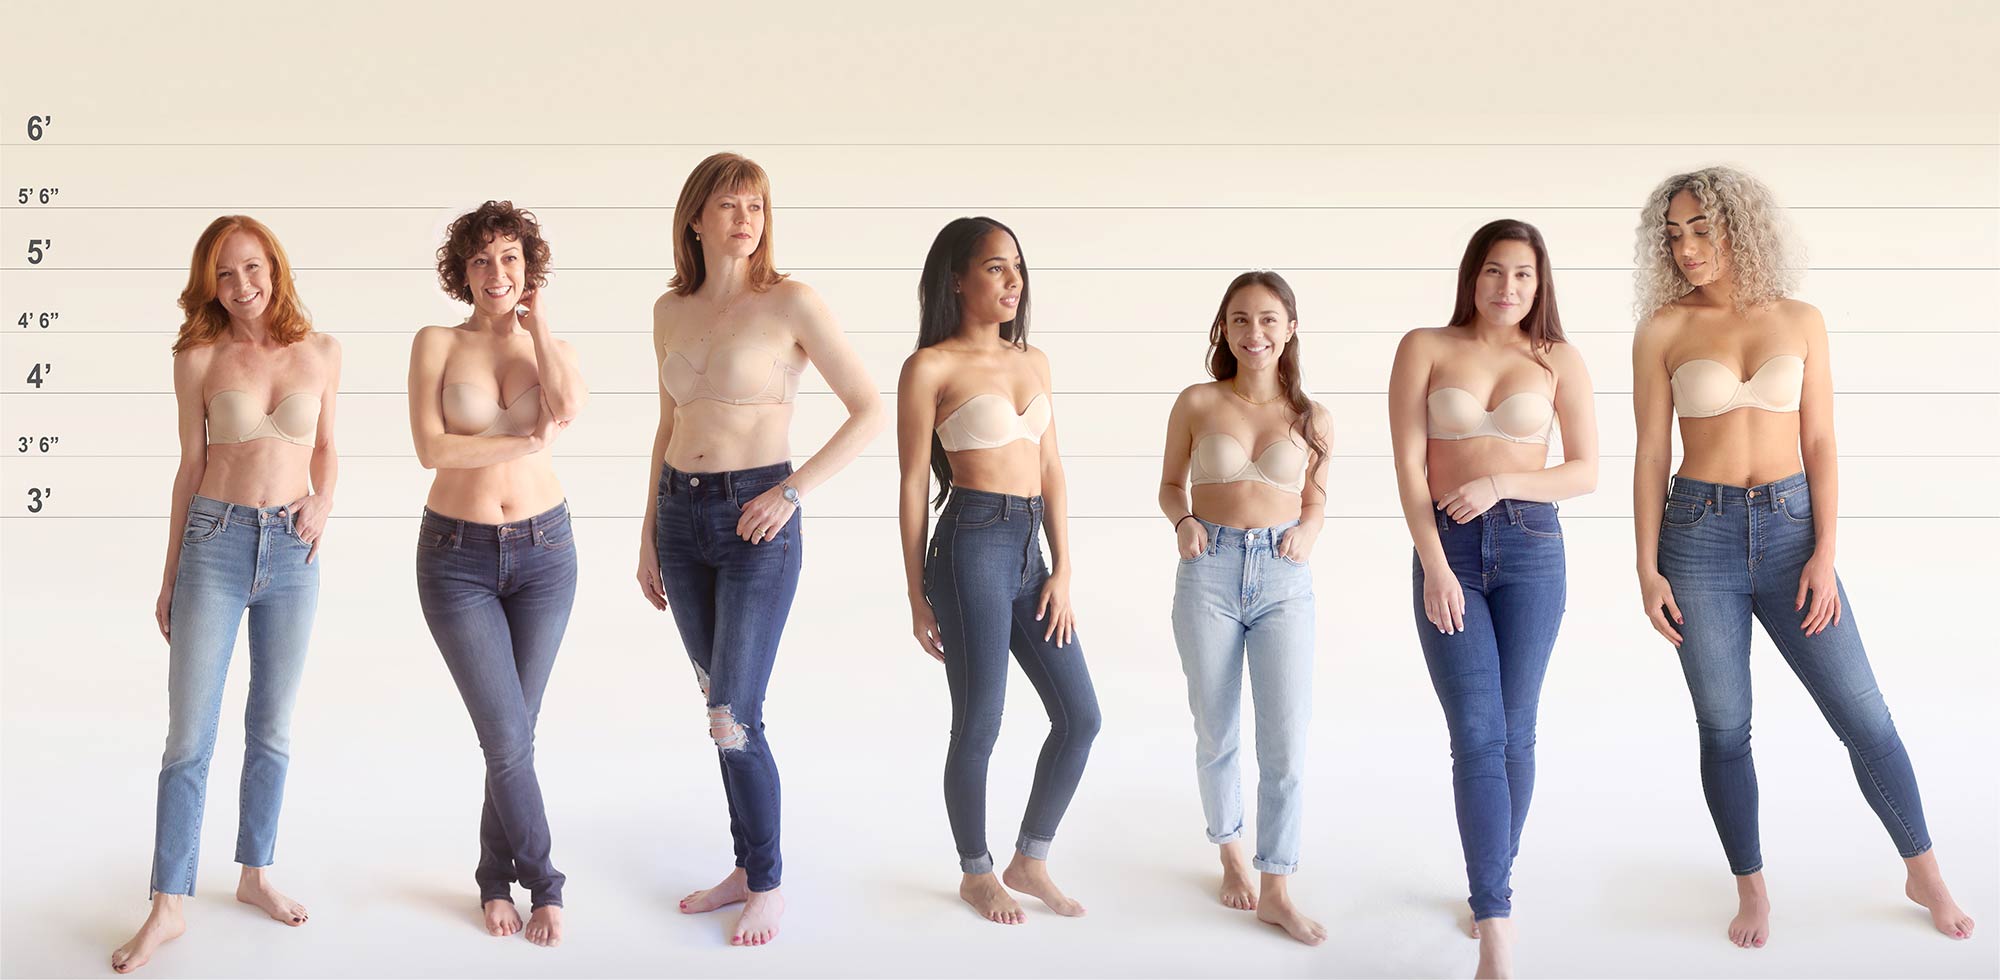 What is Petite Sizing? 5'4 & Under Fit